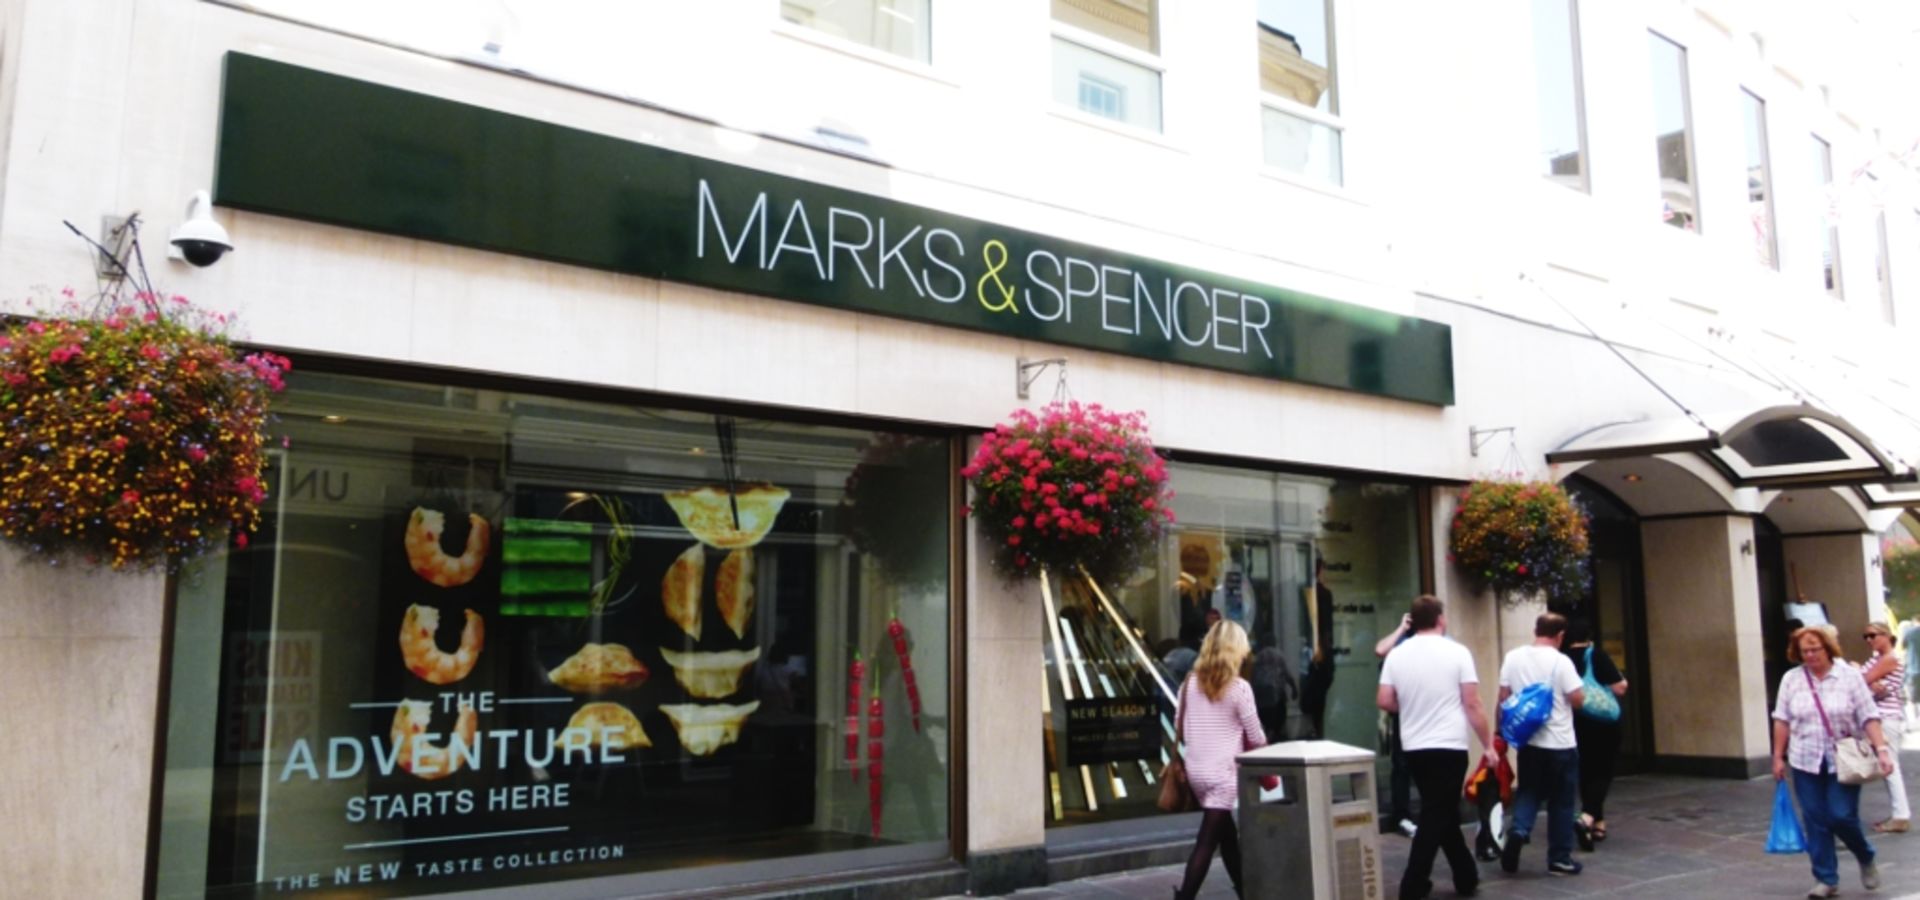 Marks & Spencer - A Bit of Home